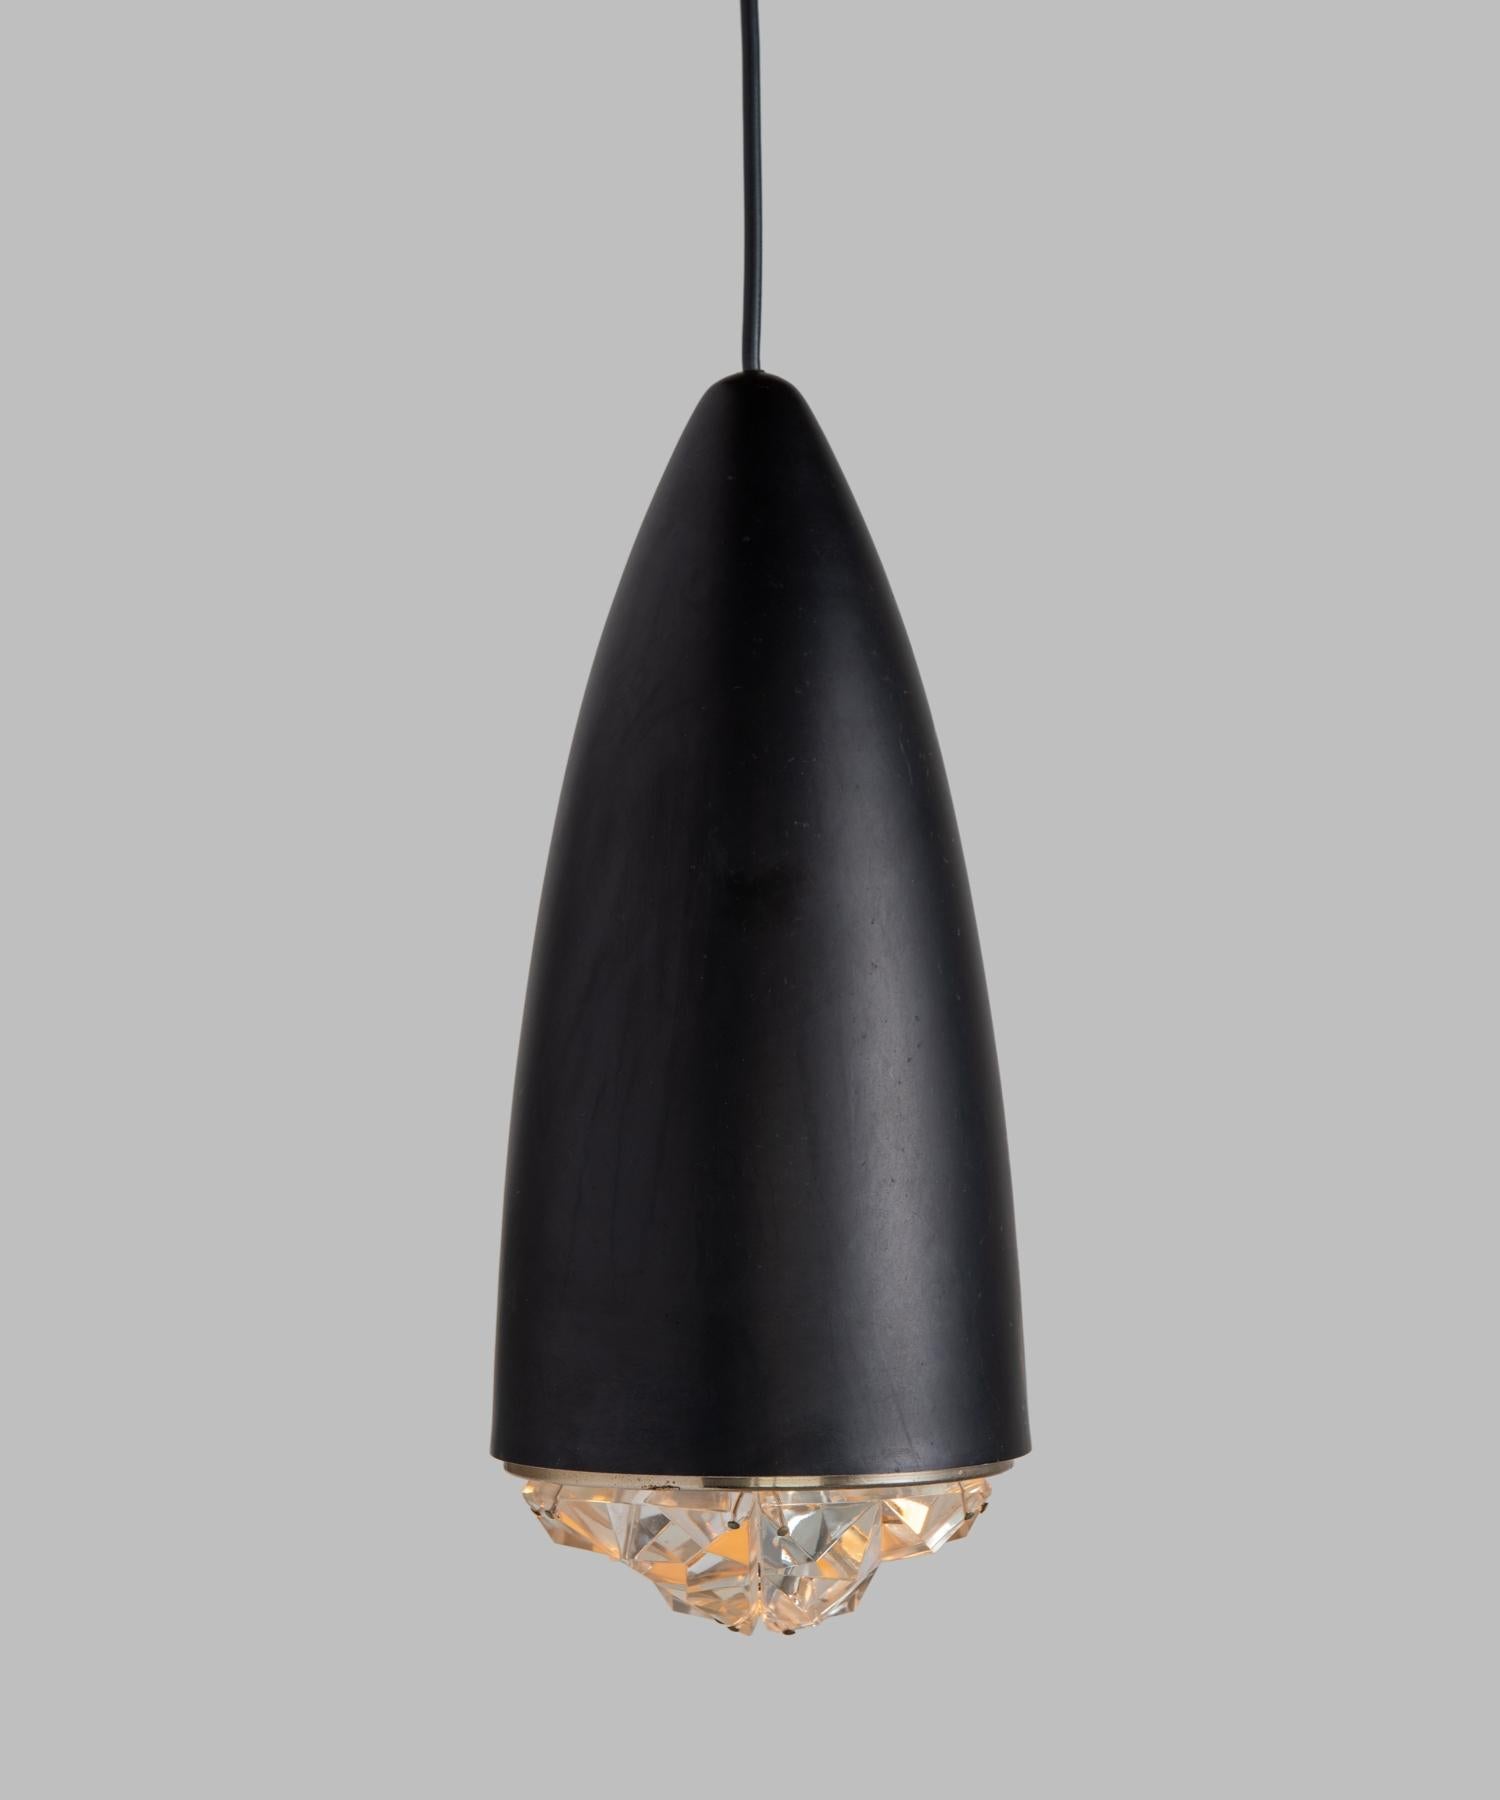 Black metal and cut glass pendant, Italy, circa 1960

Original black paint, cut glass shade in the style of Max Ingrand.